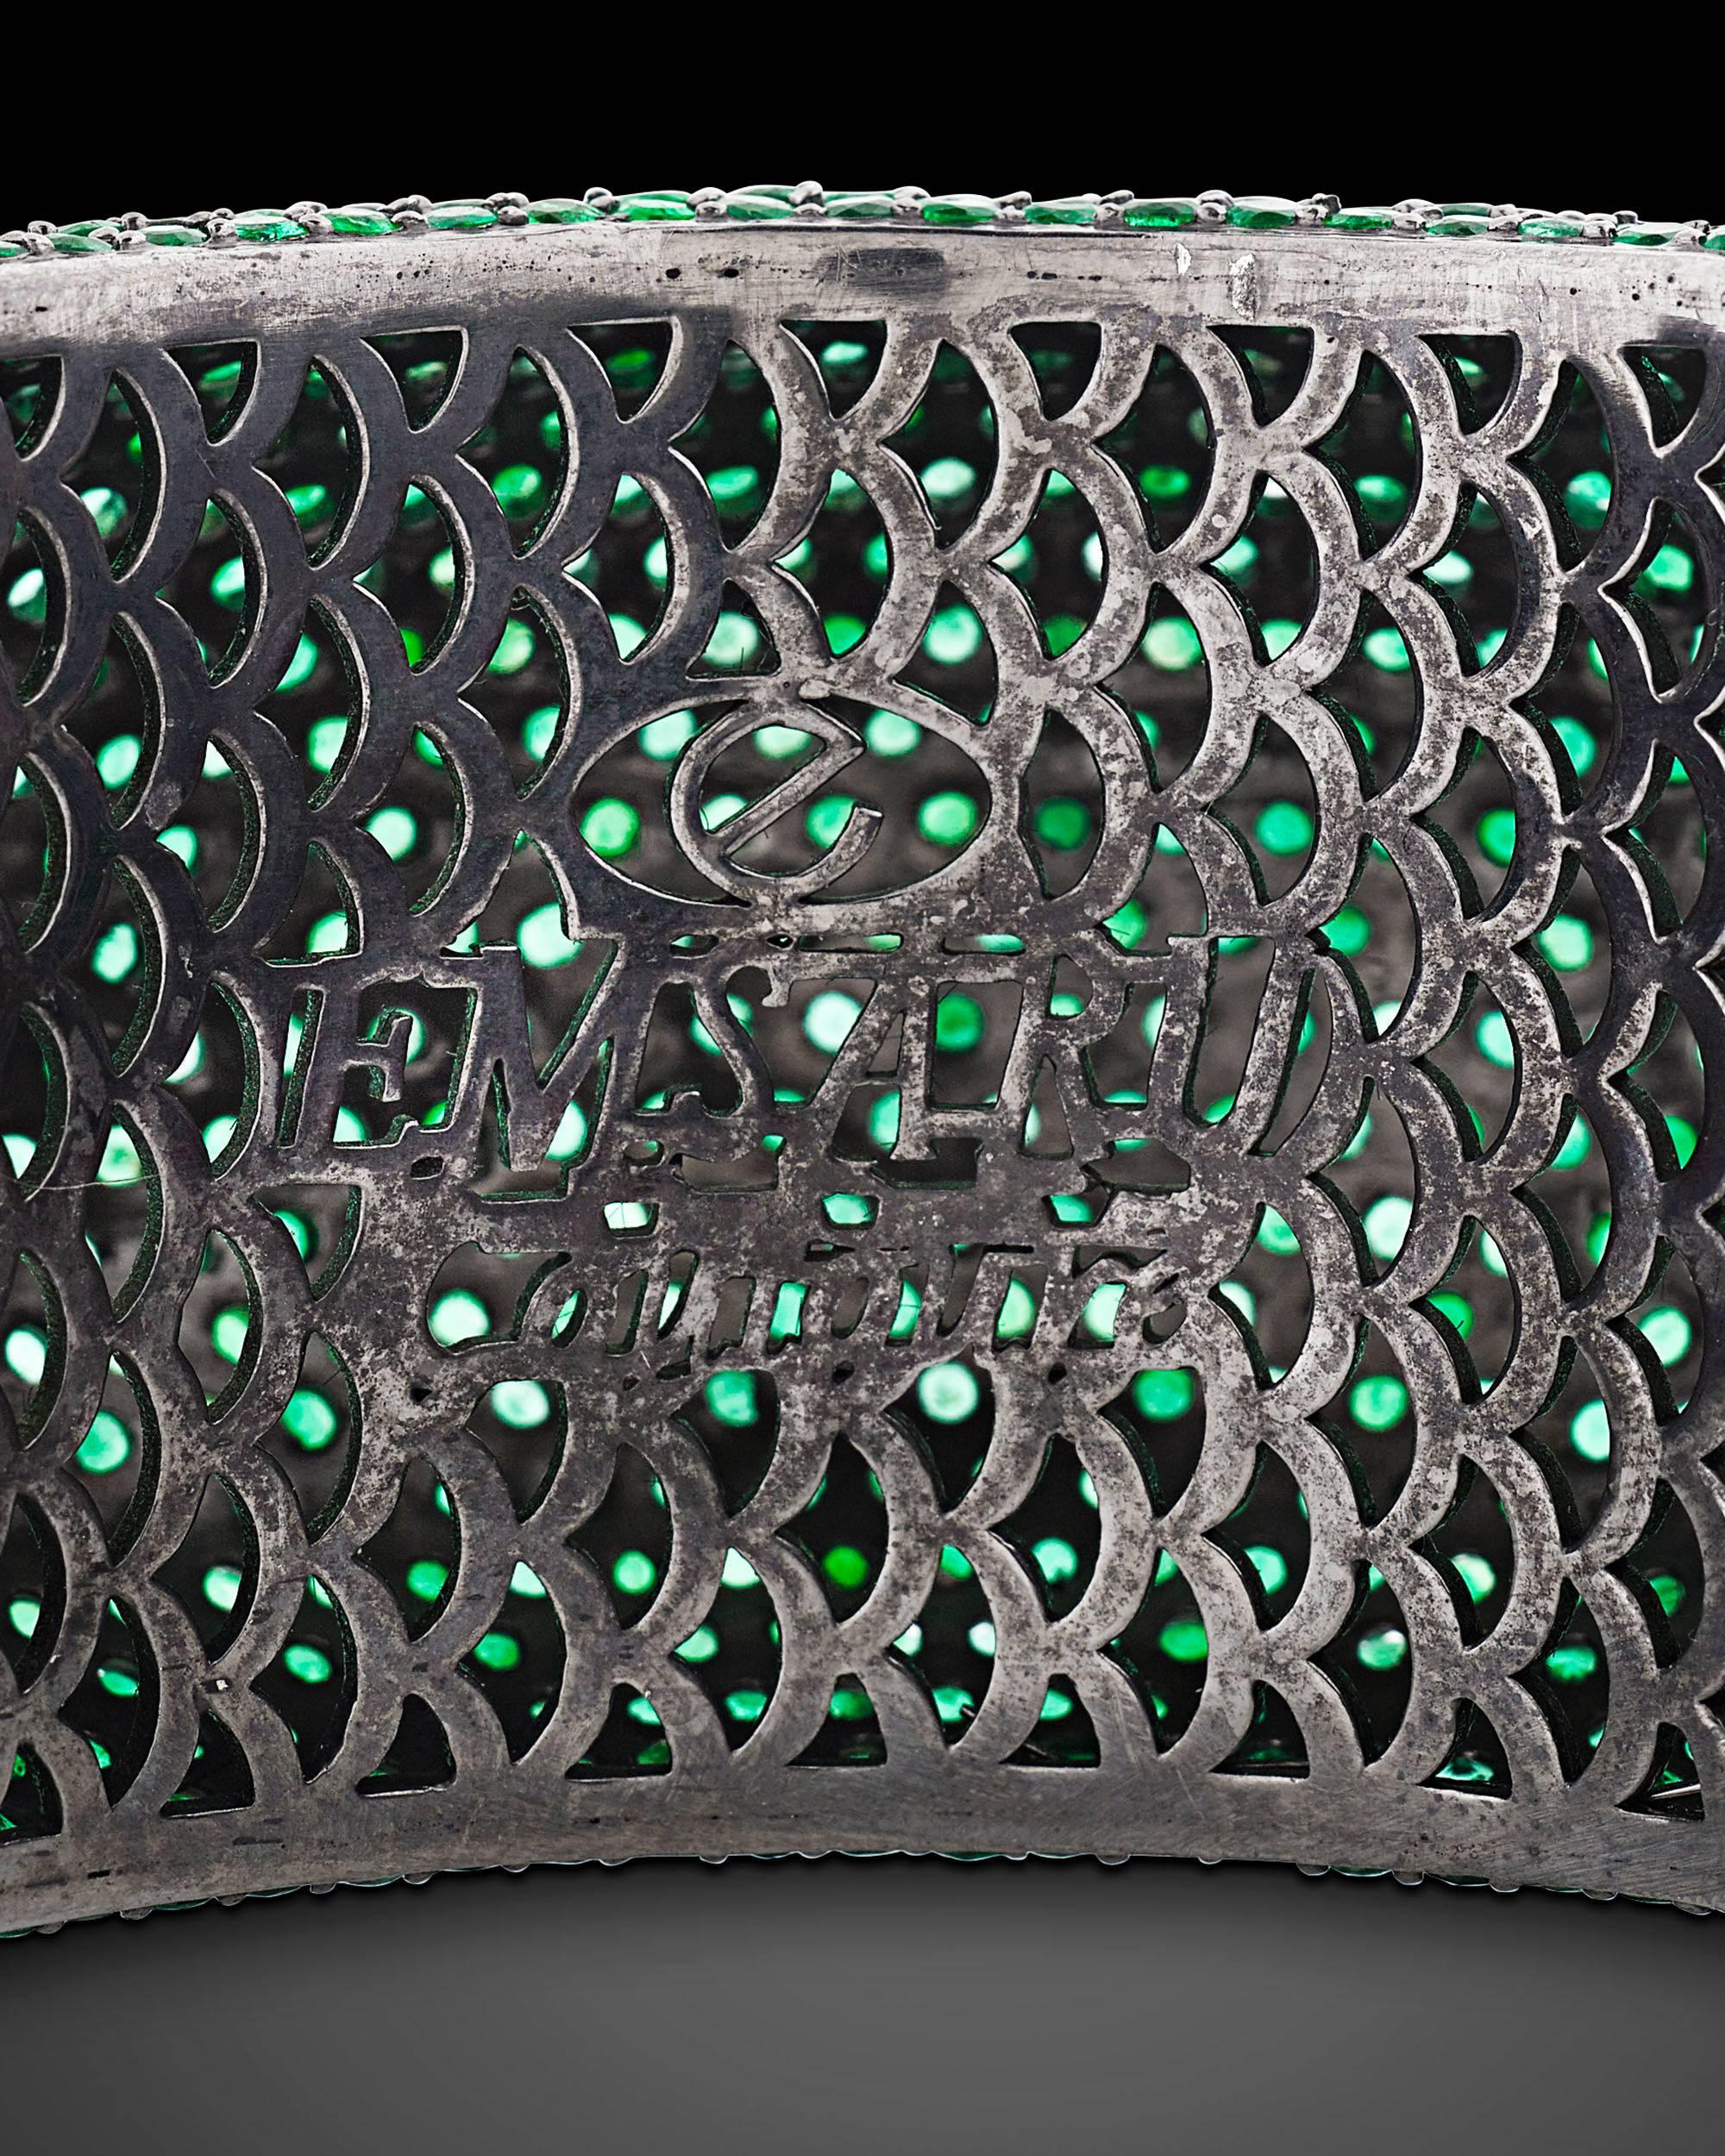 A field of dazzling emerald green envelops this sophisticated and bold bangle bracelet. Approximately 115 total carats of emeralds blanket the design, beautifully blended within the rhodium blackened sterling silver setting. Gently rounded, the